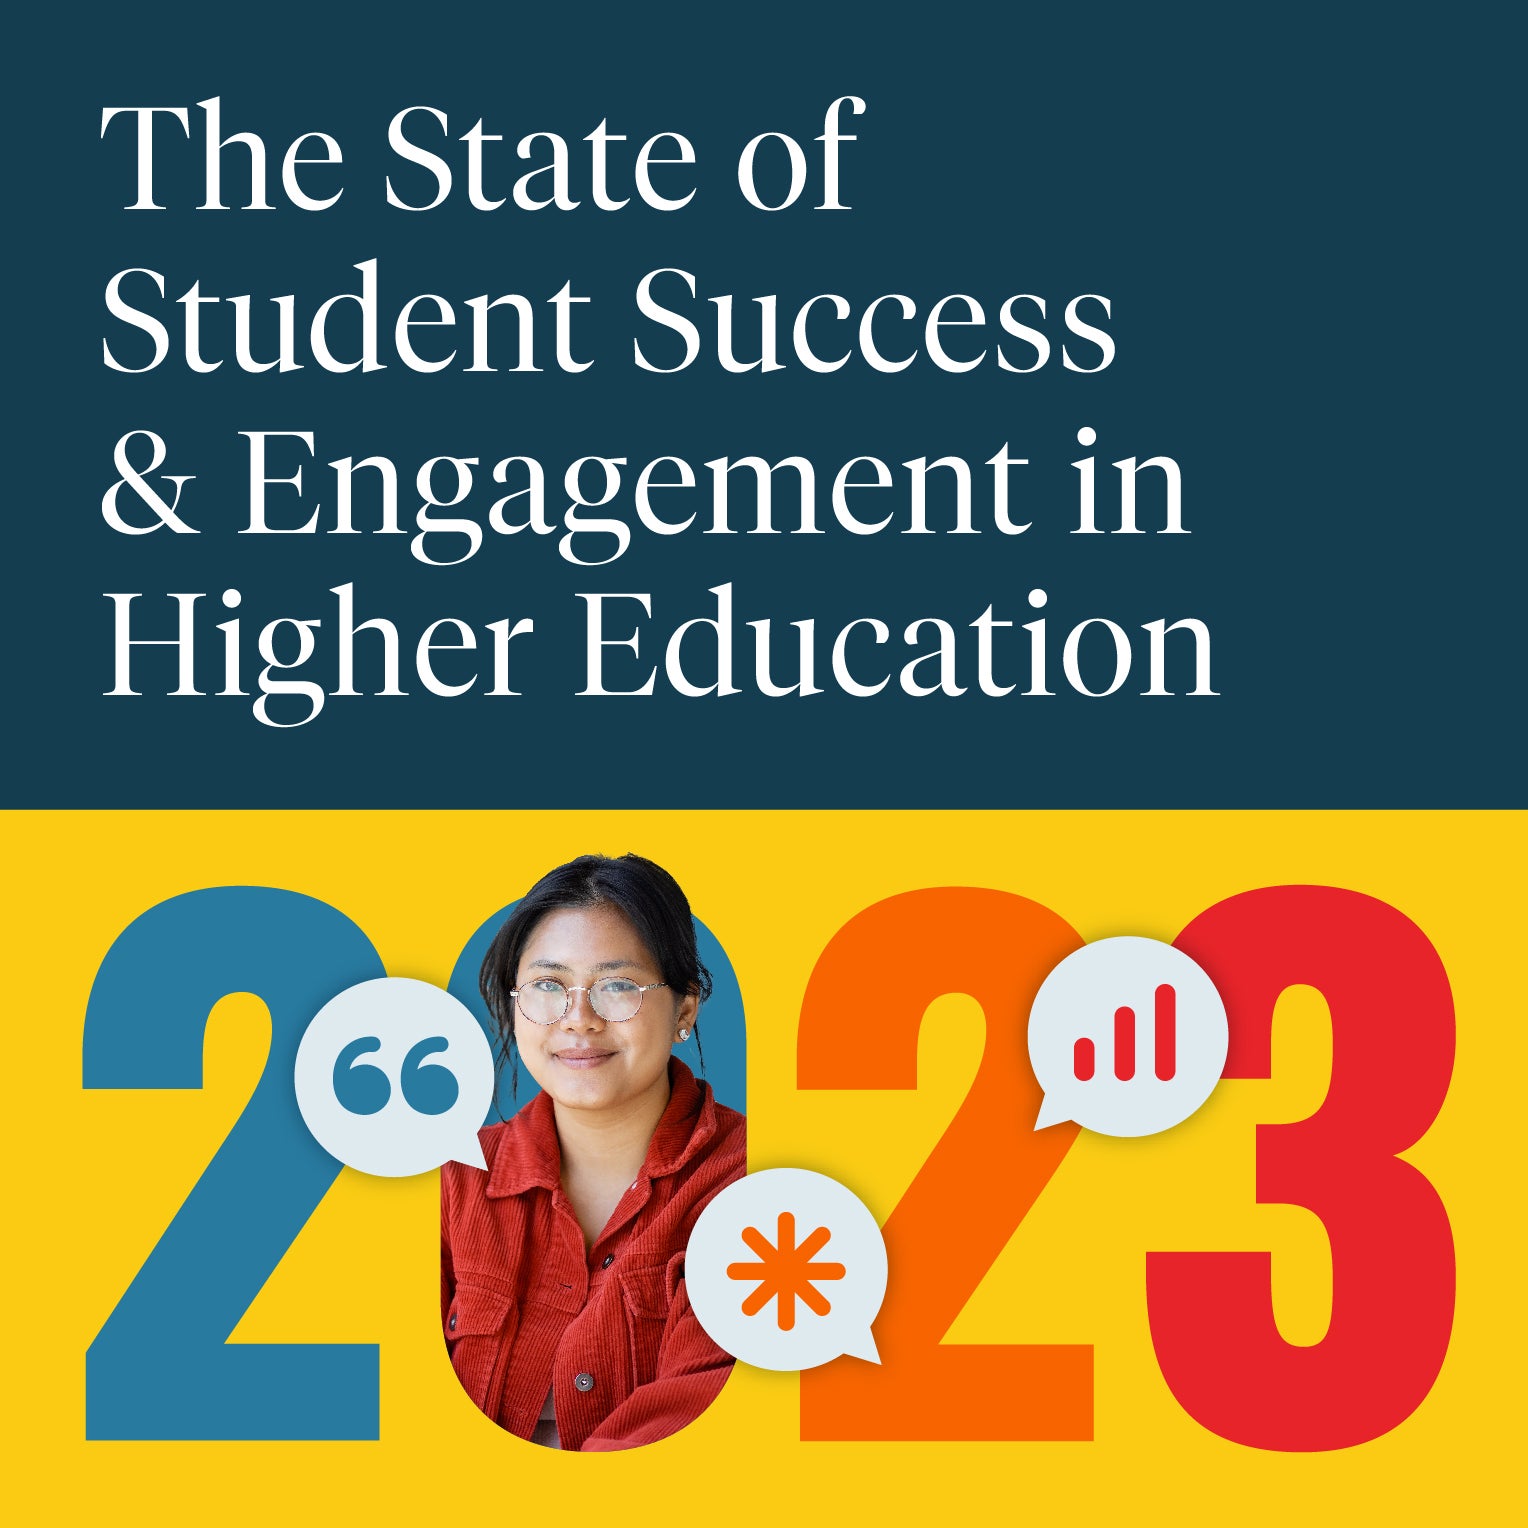 The State of Student Success & Engagement in Higher